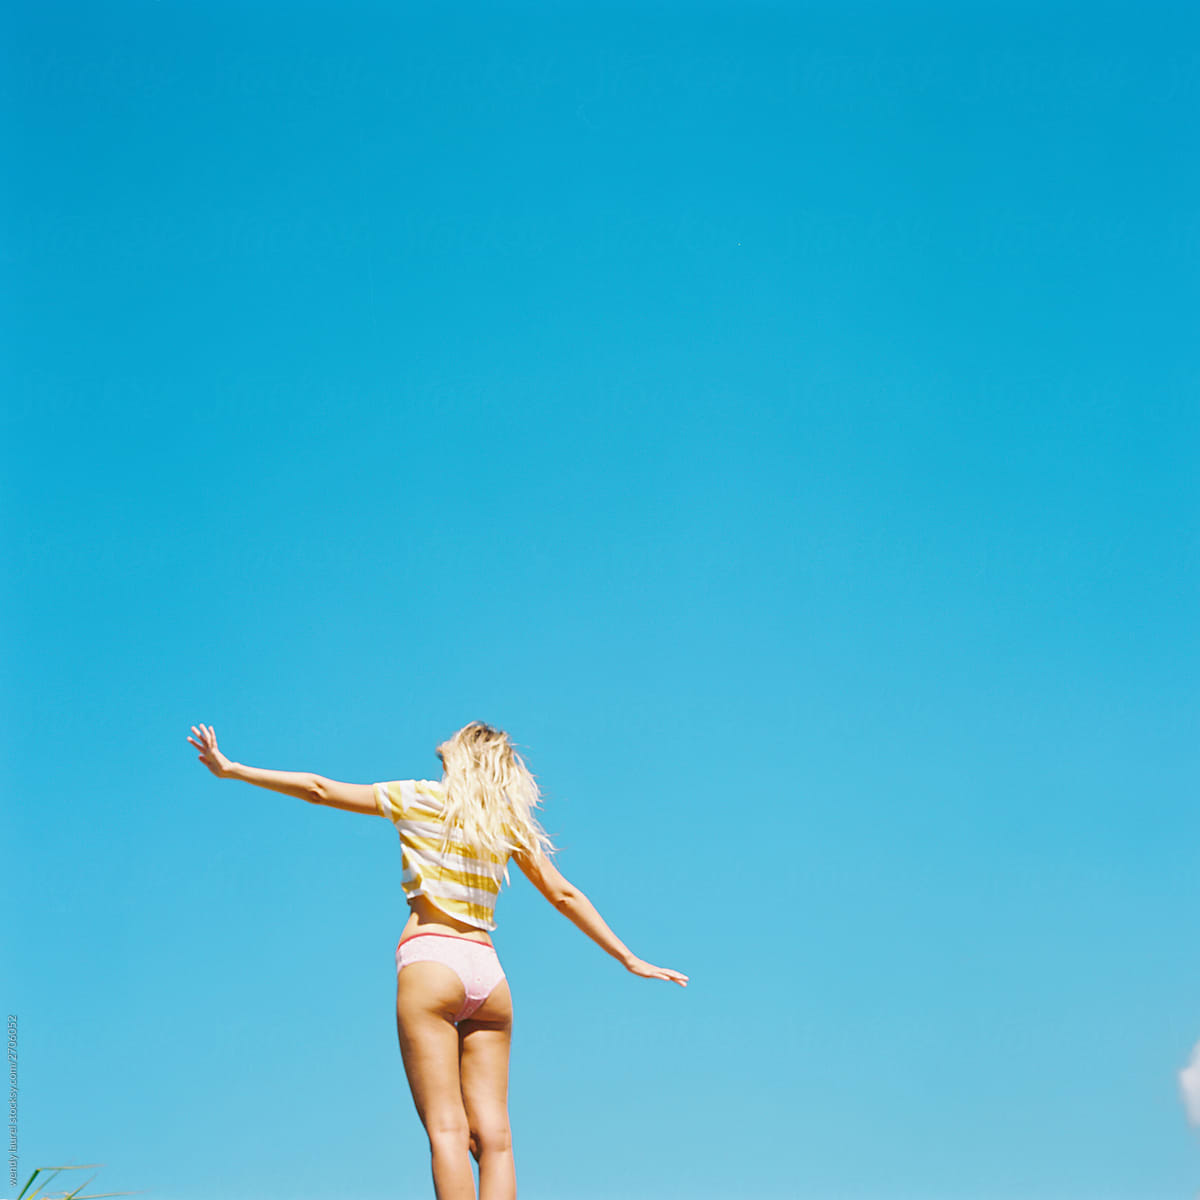 Blonde beautiful woman against bright blue sky in underwear and bra and striped tee